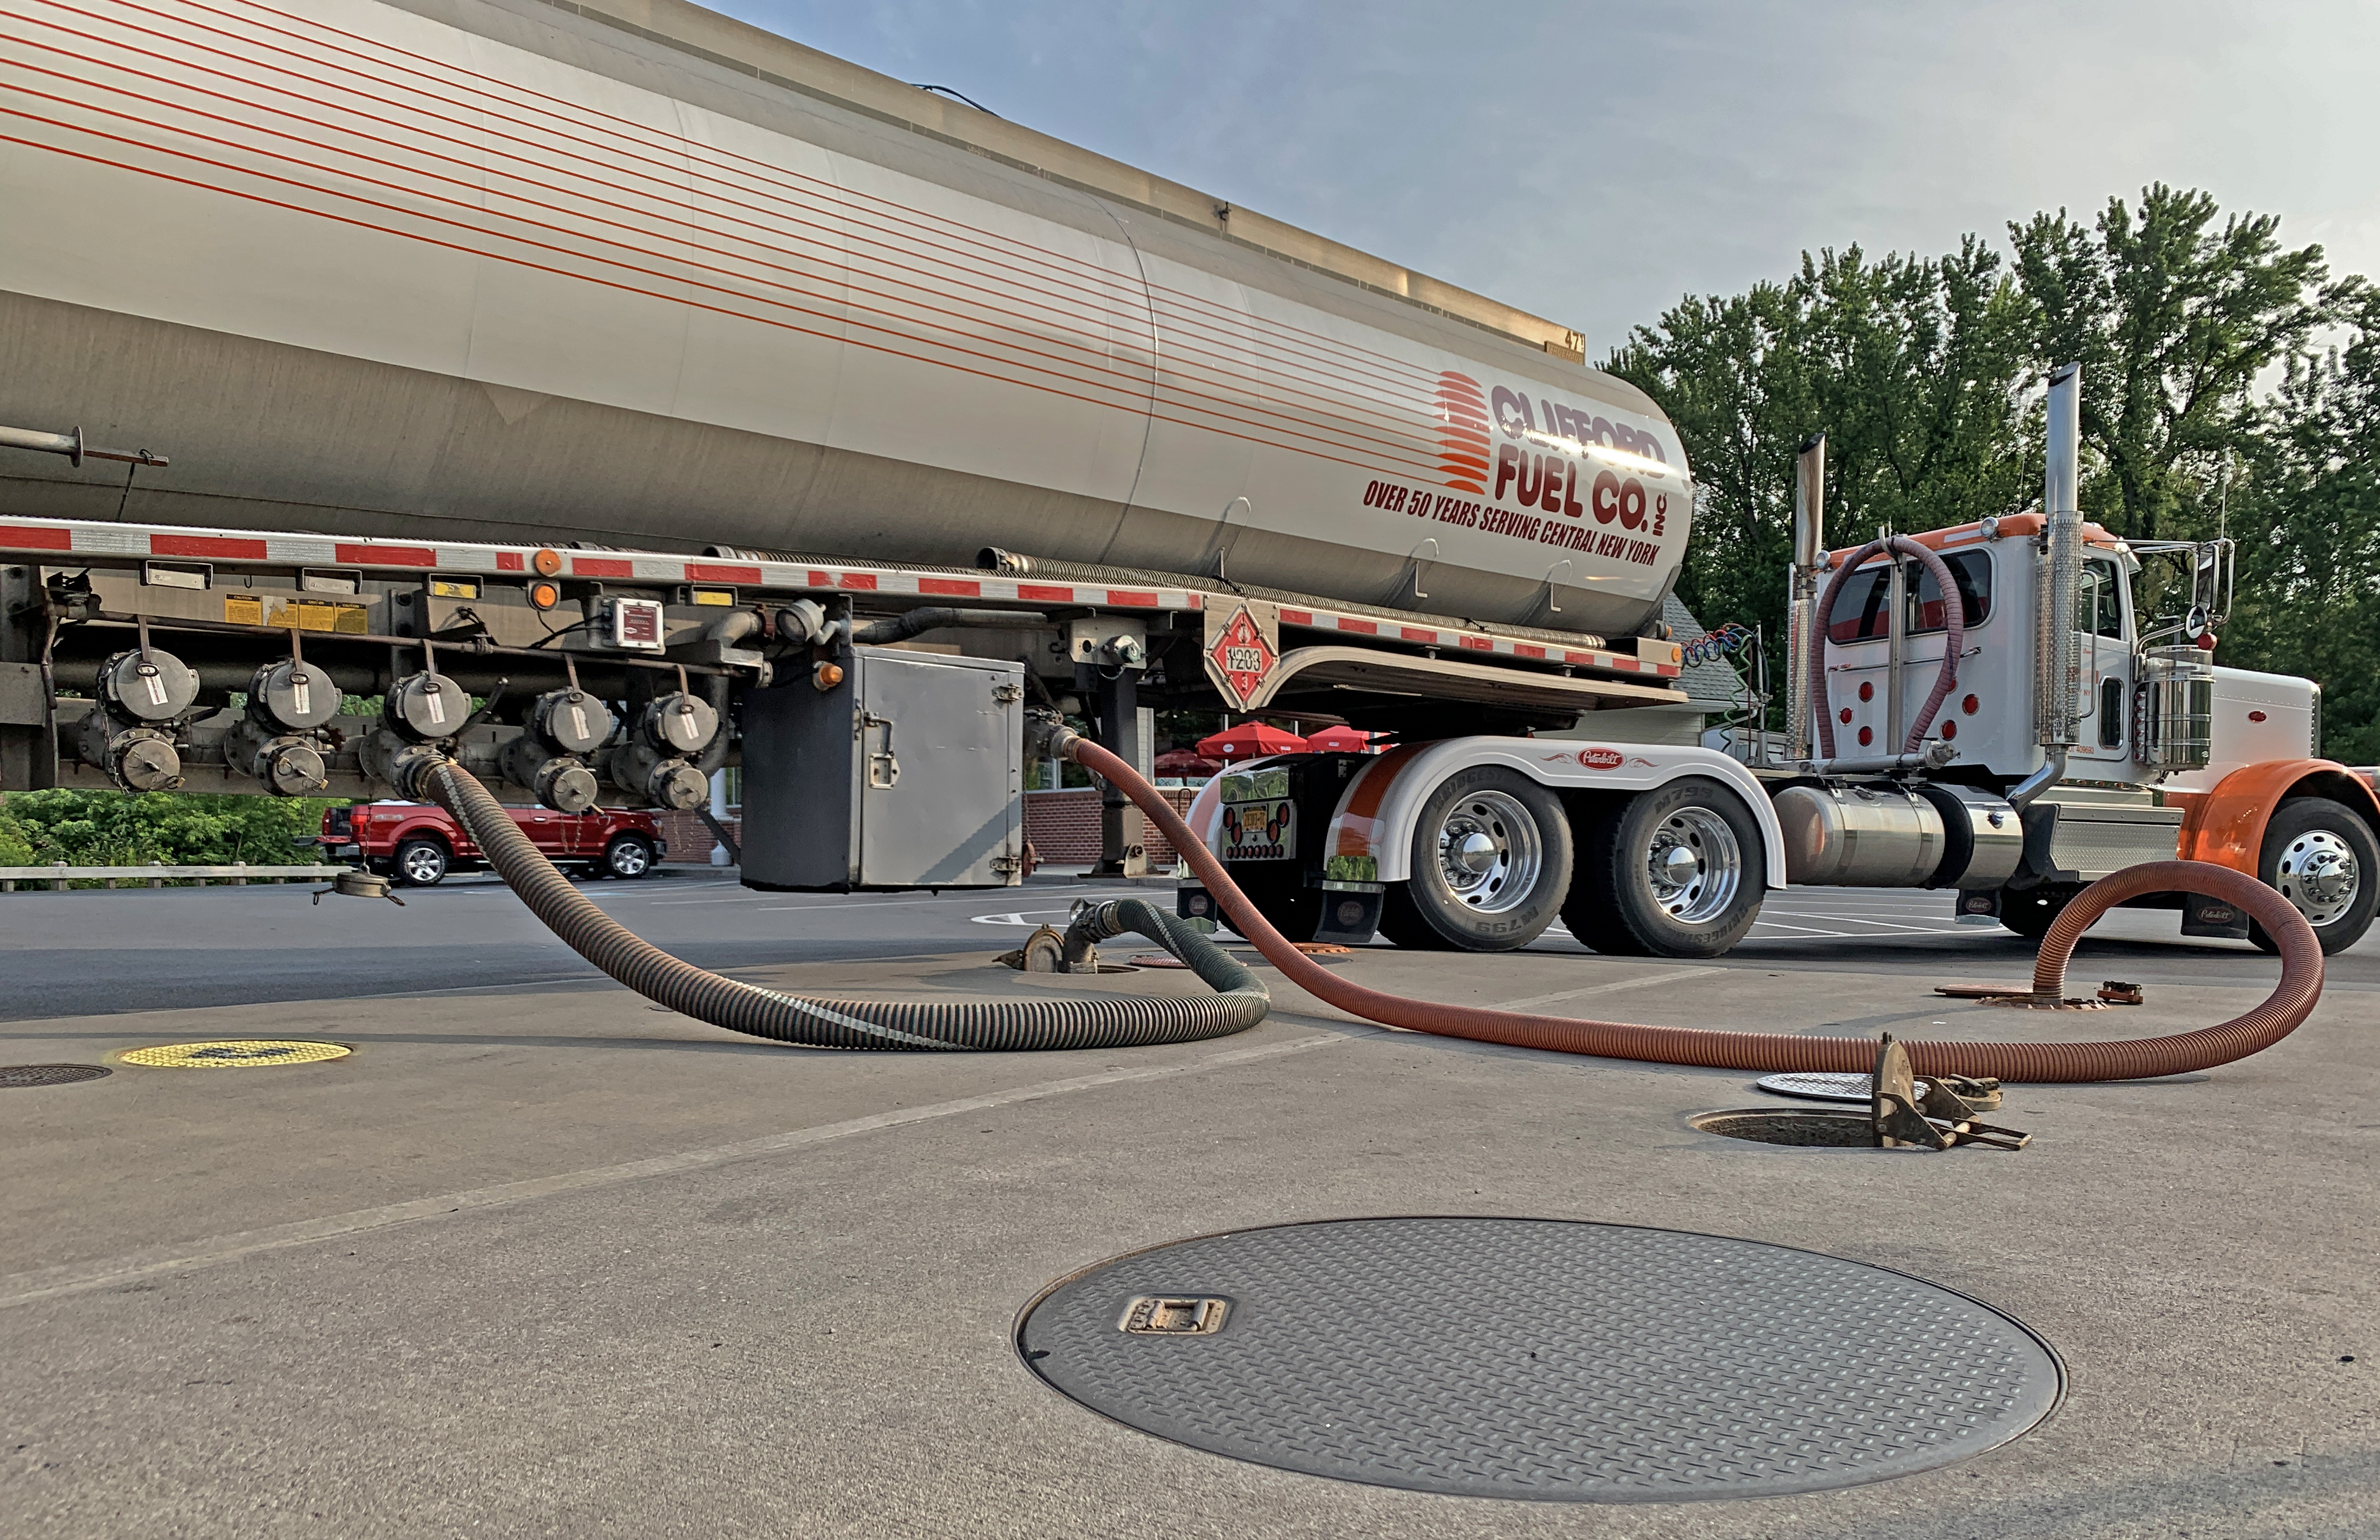 clifford fuel truck delivering fuel to gas station